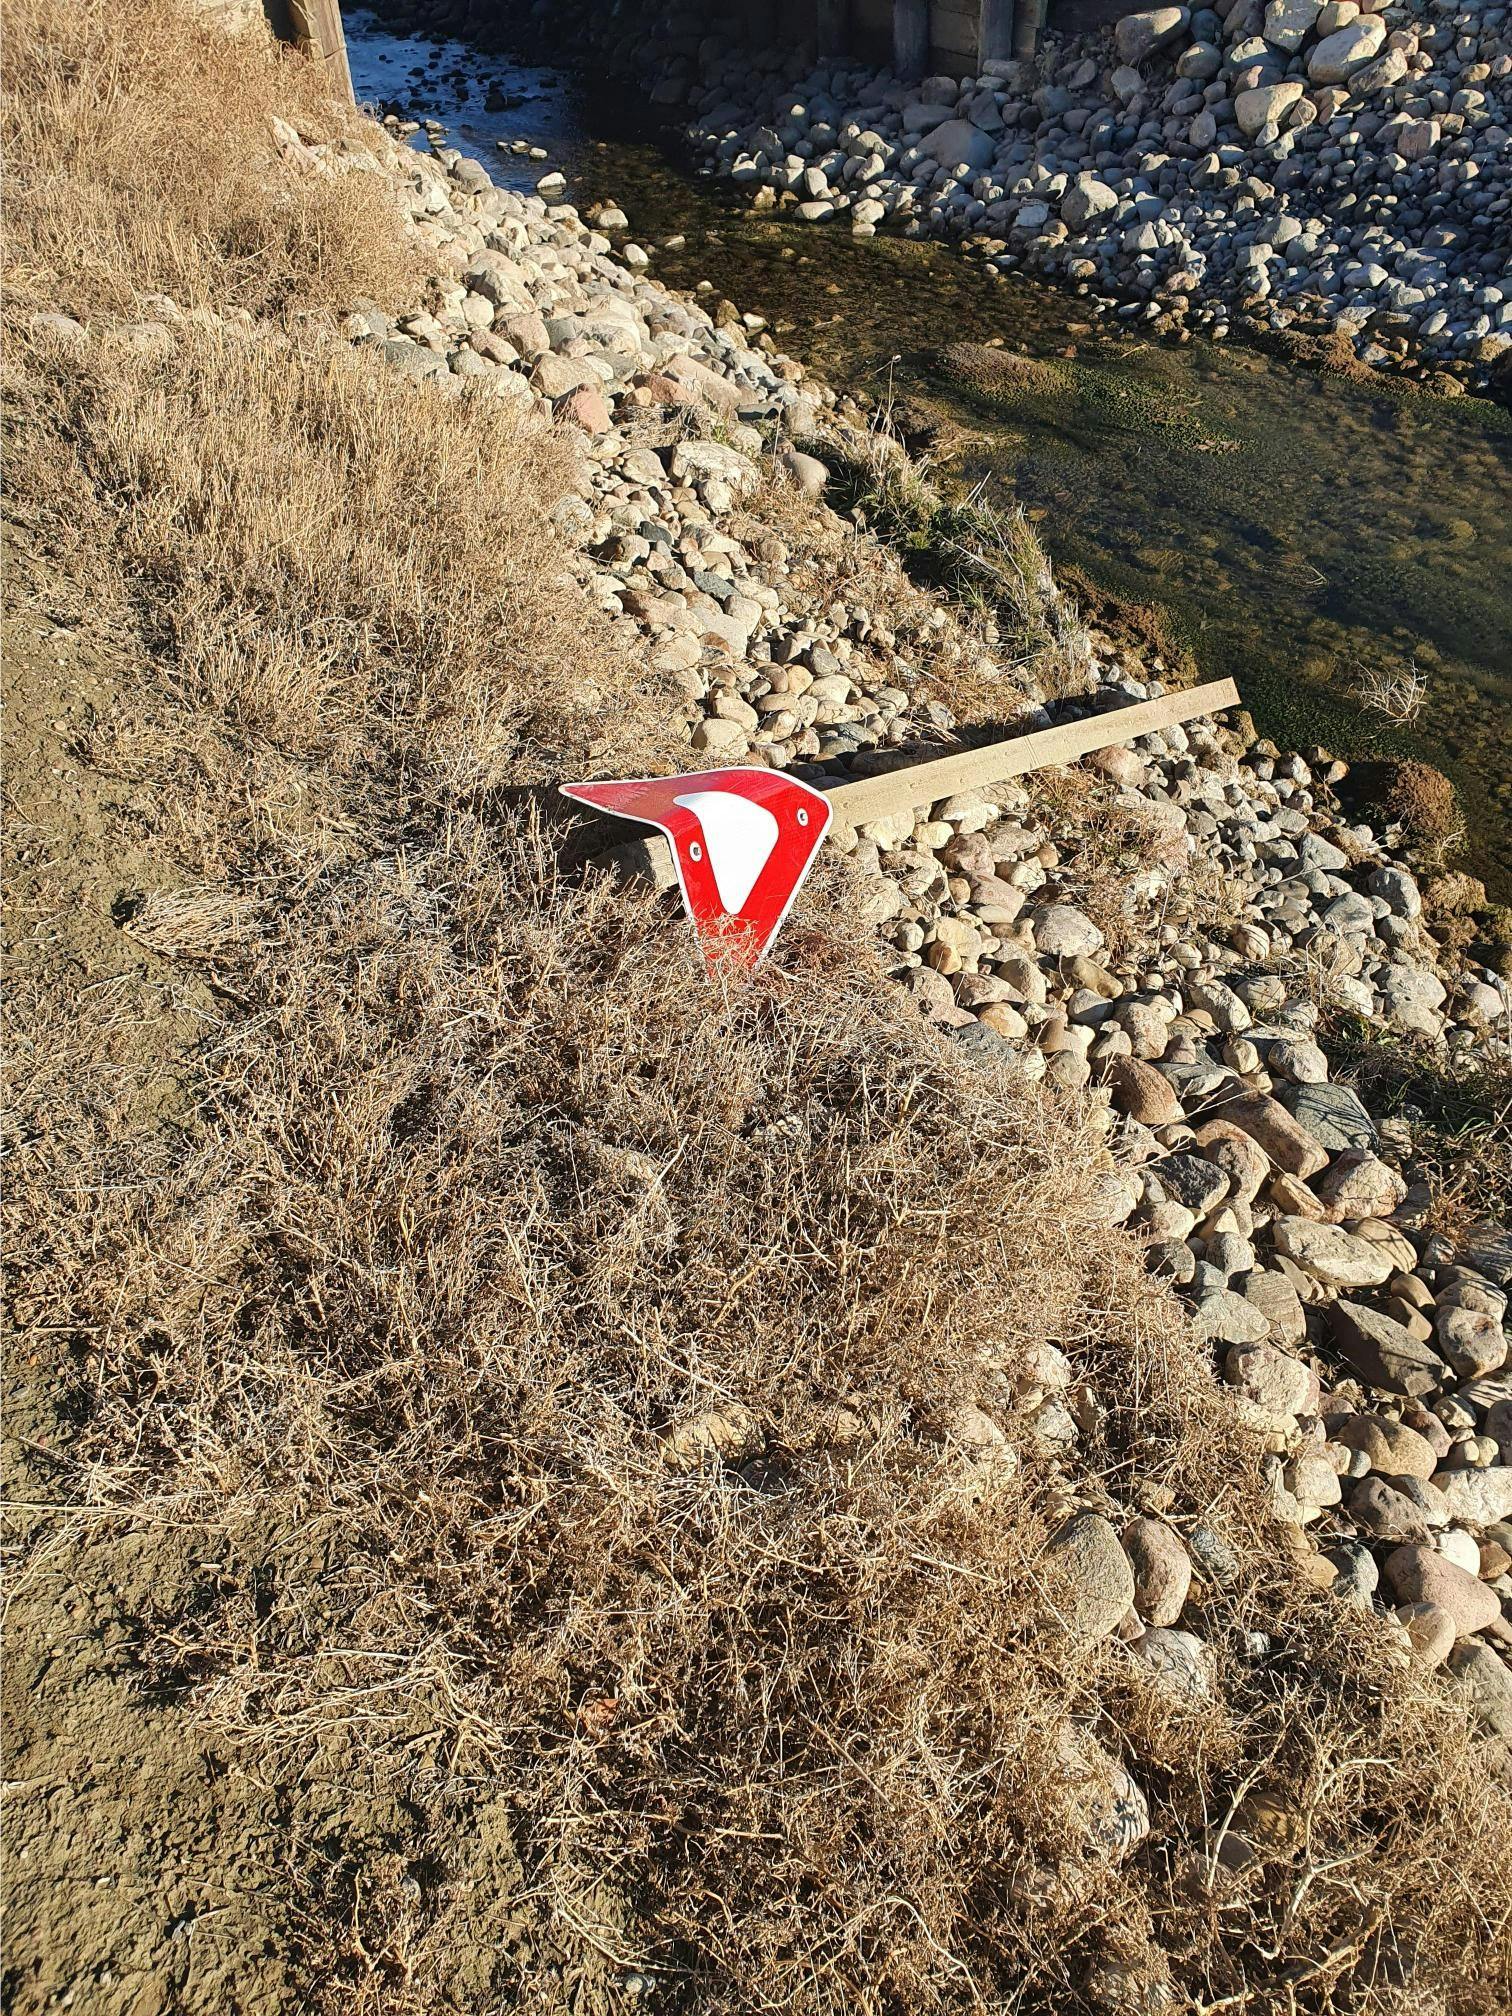 Another yield sign that was removed and discarded into a canal